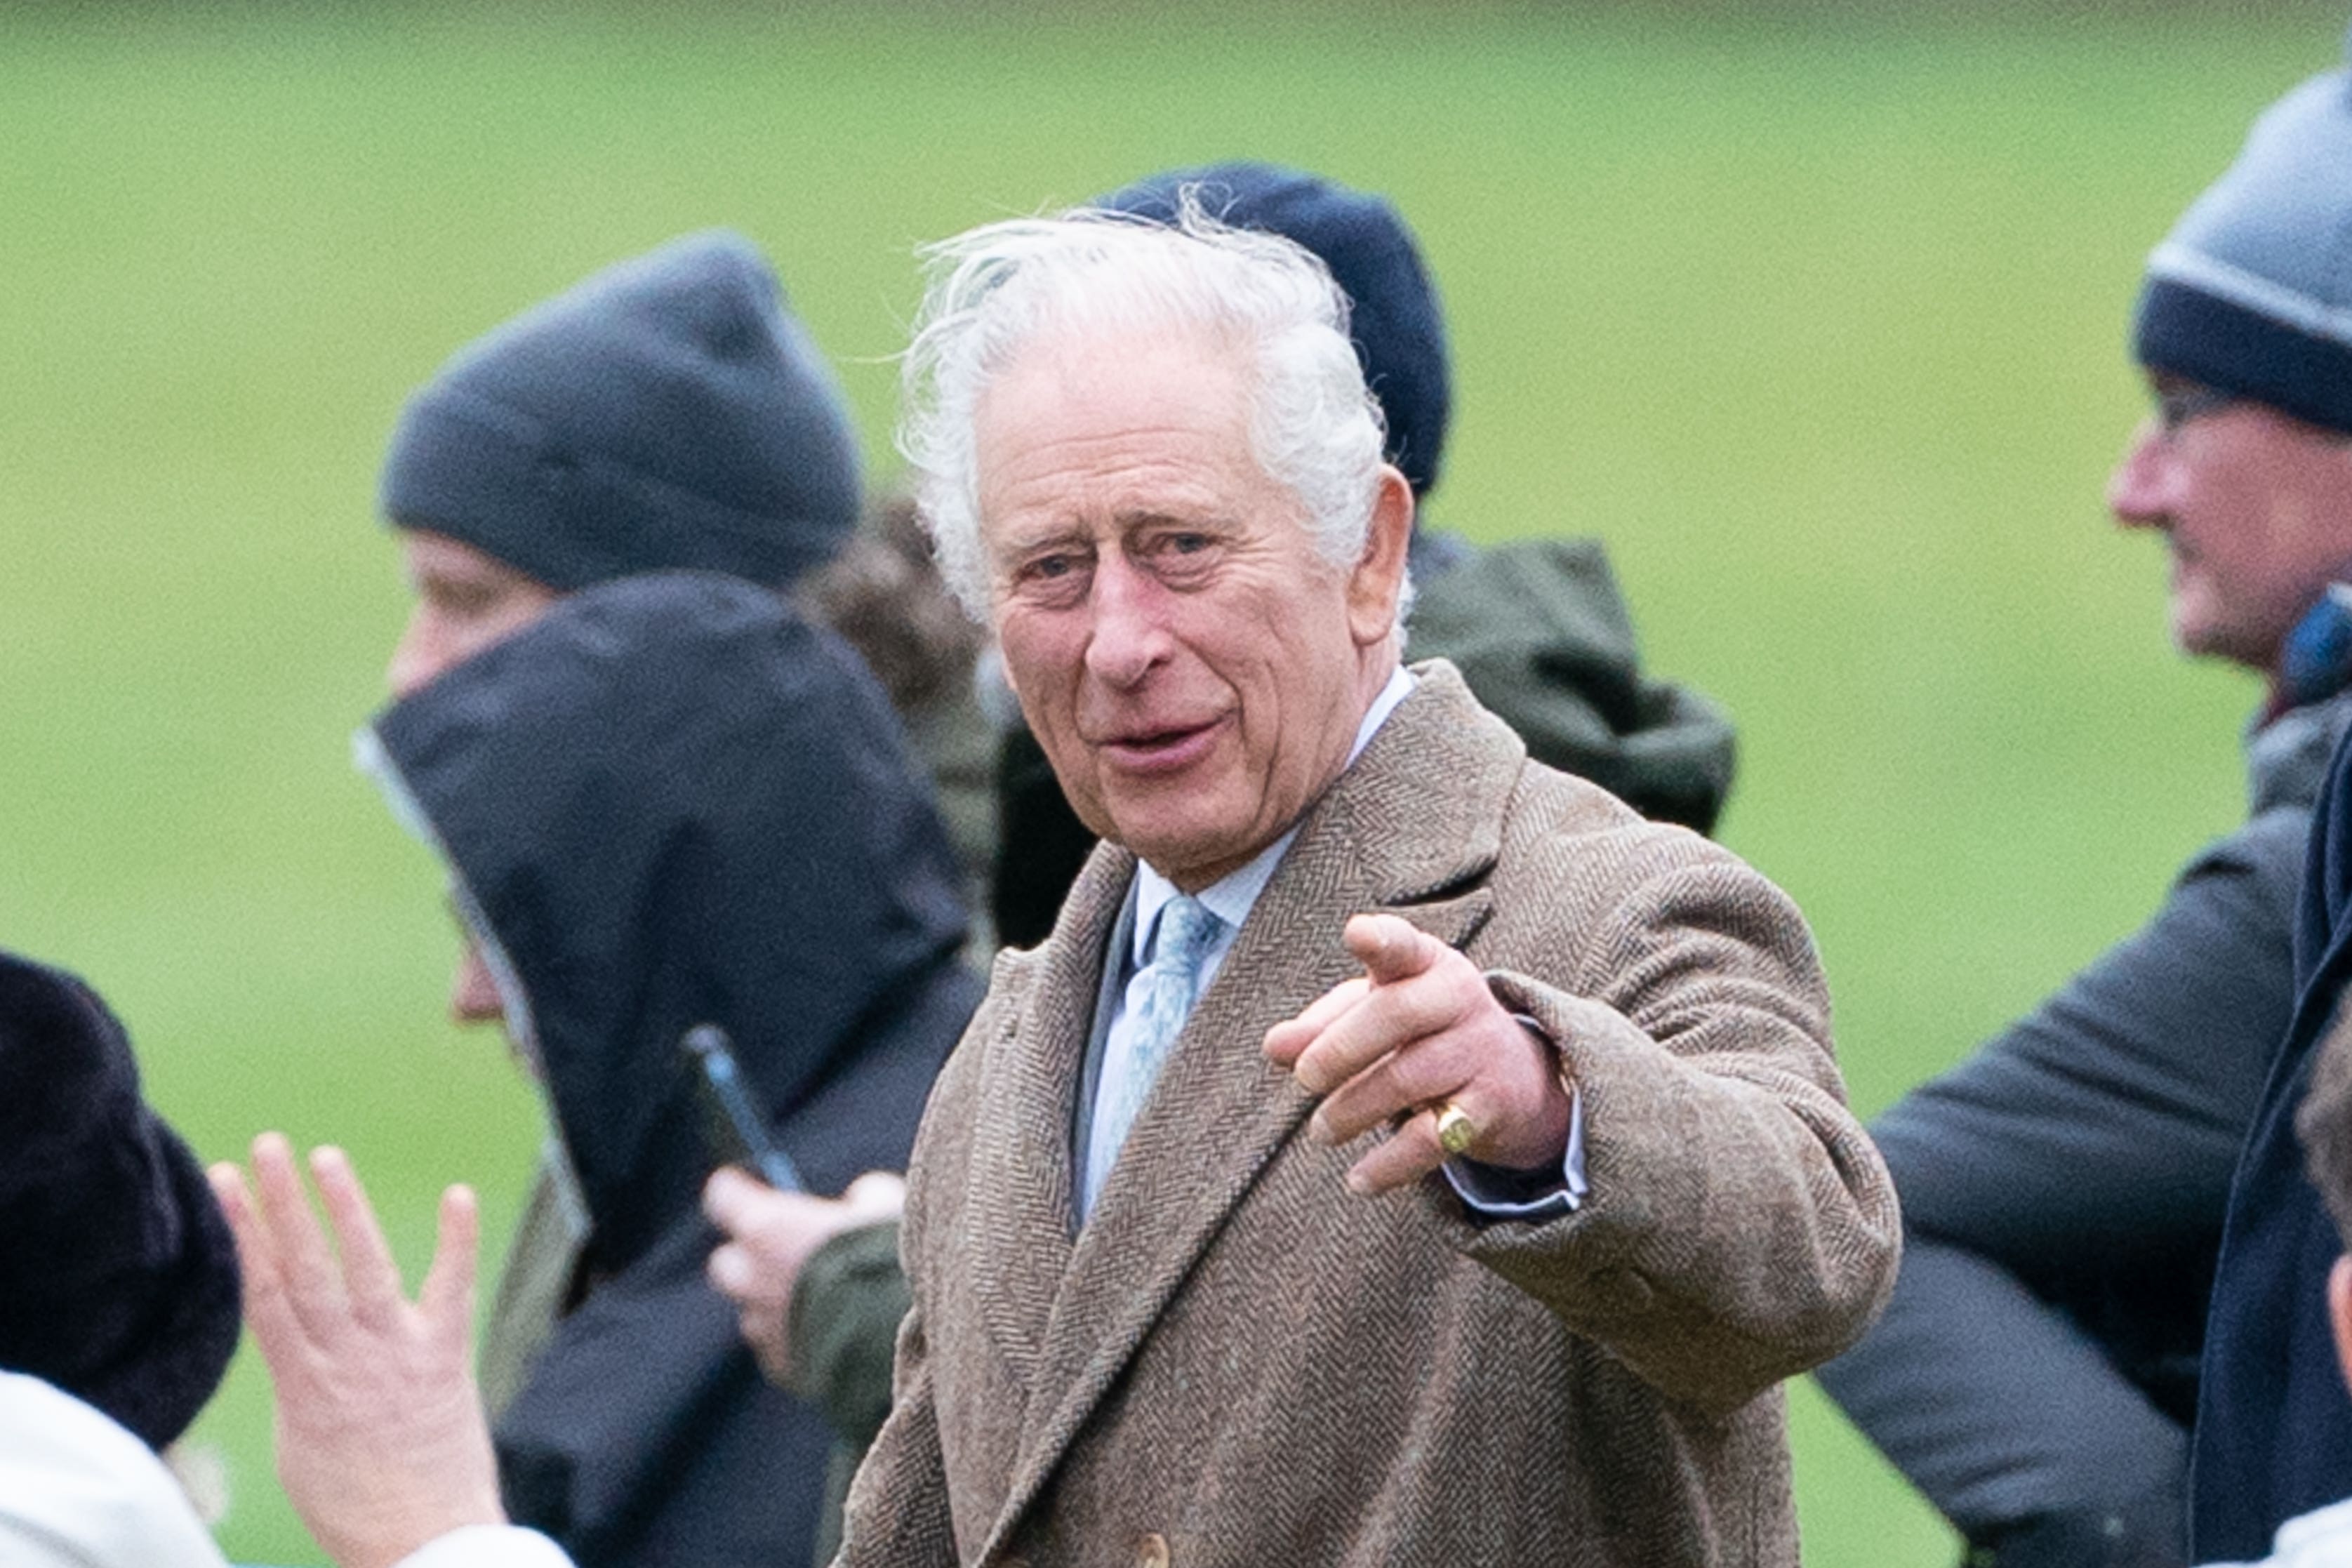 The King is to have surgery for an enlarged prostate (Joe Giddens/PA